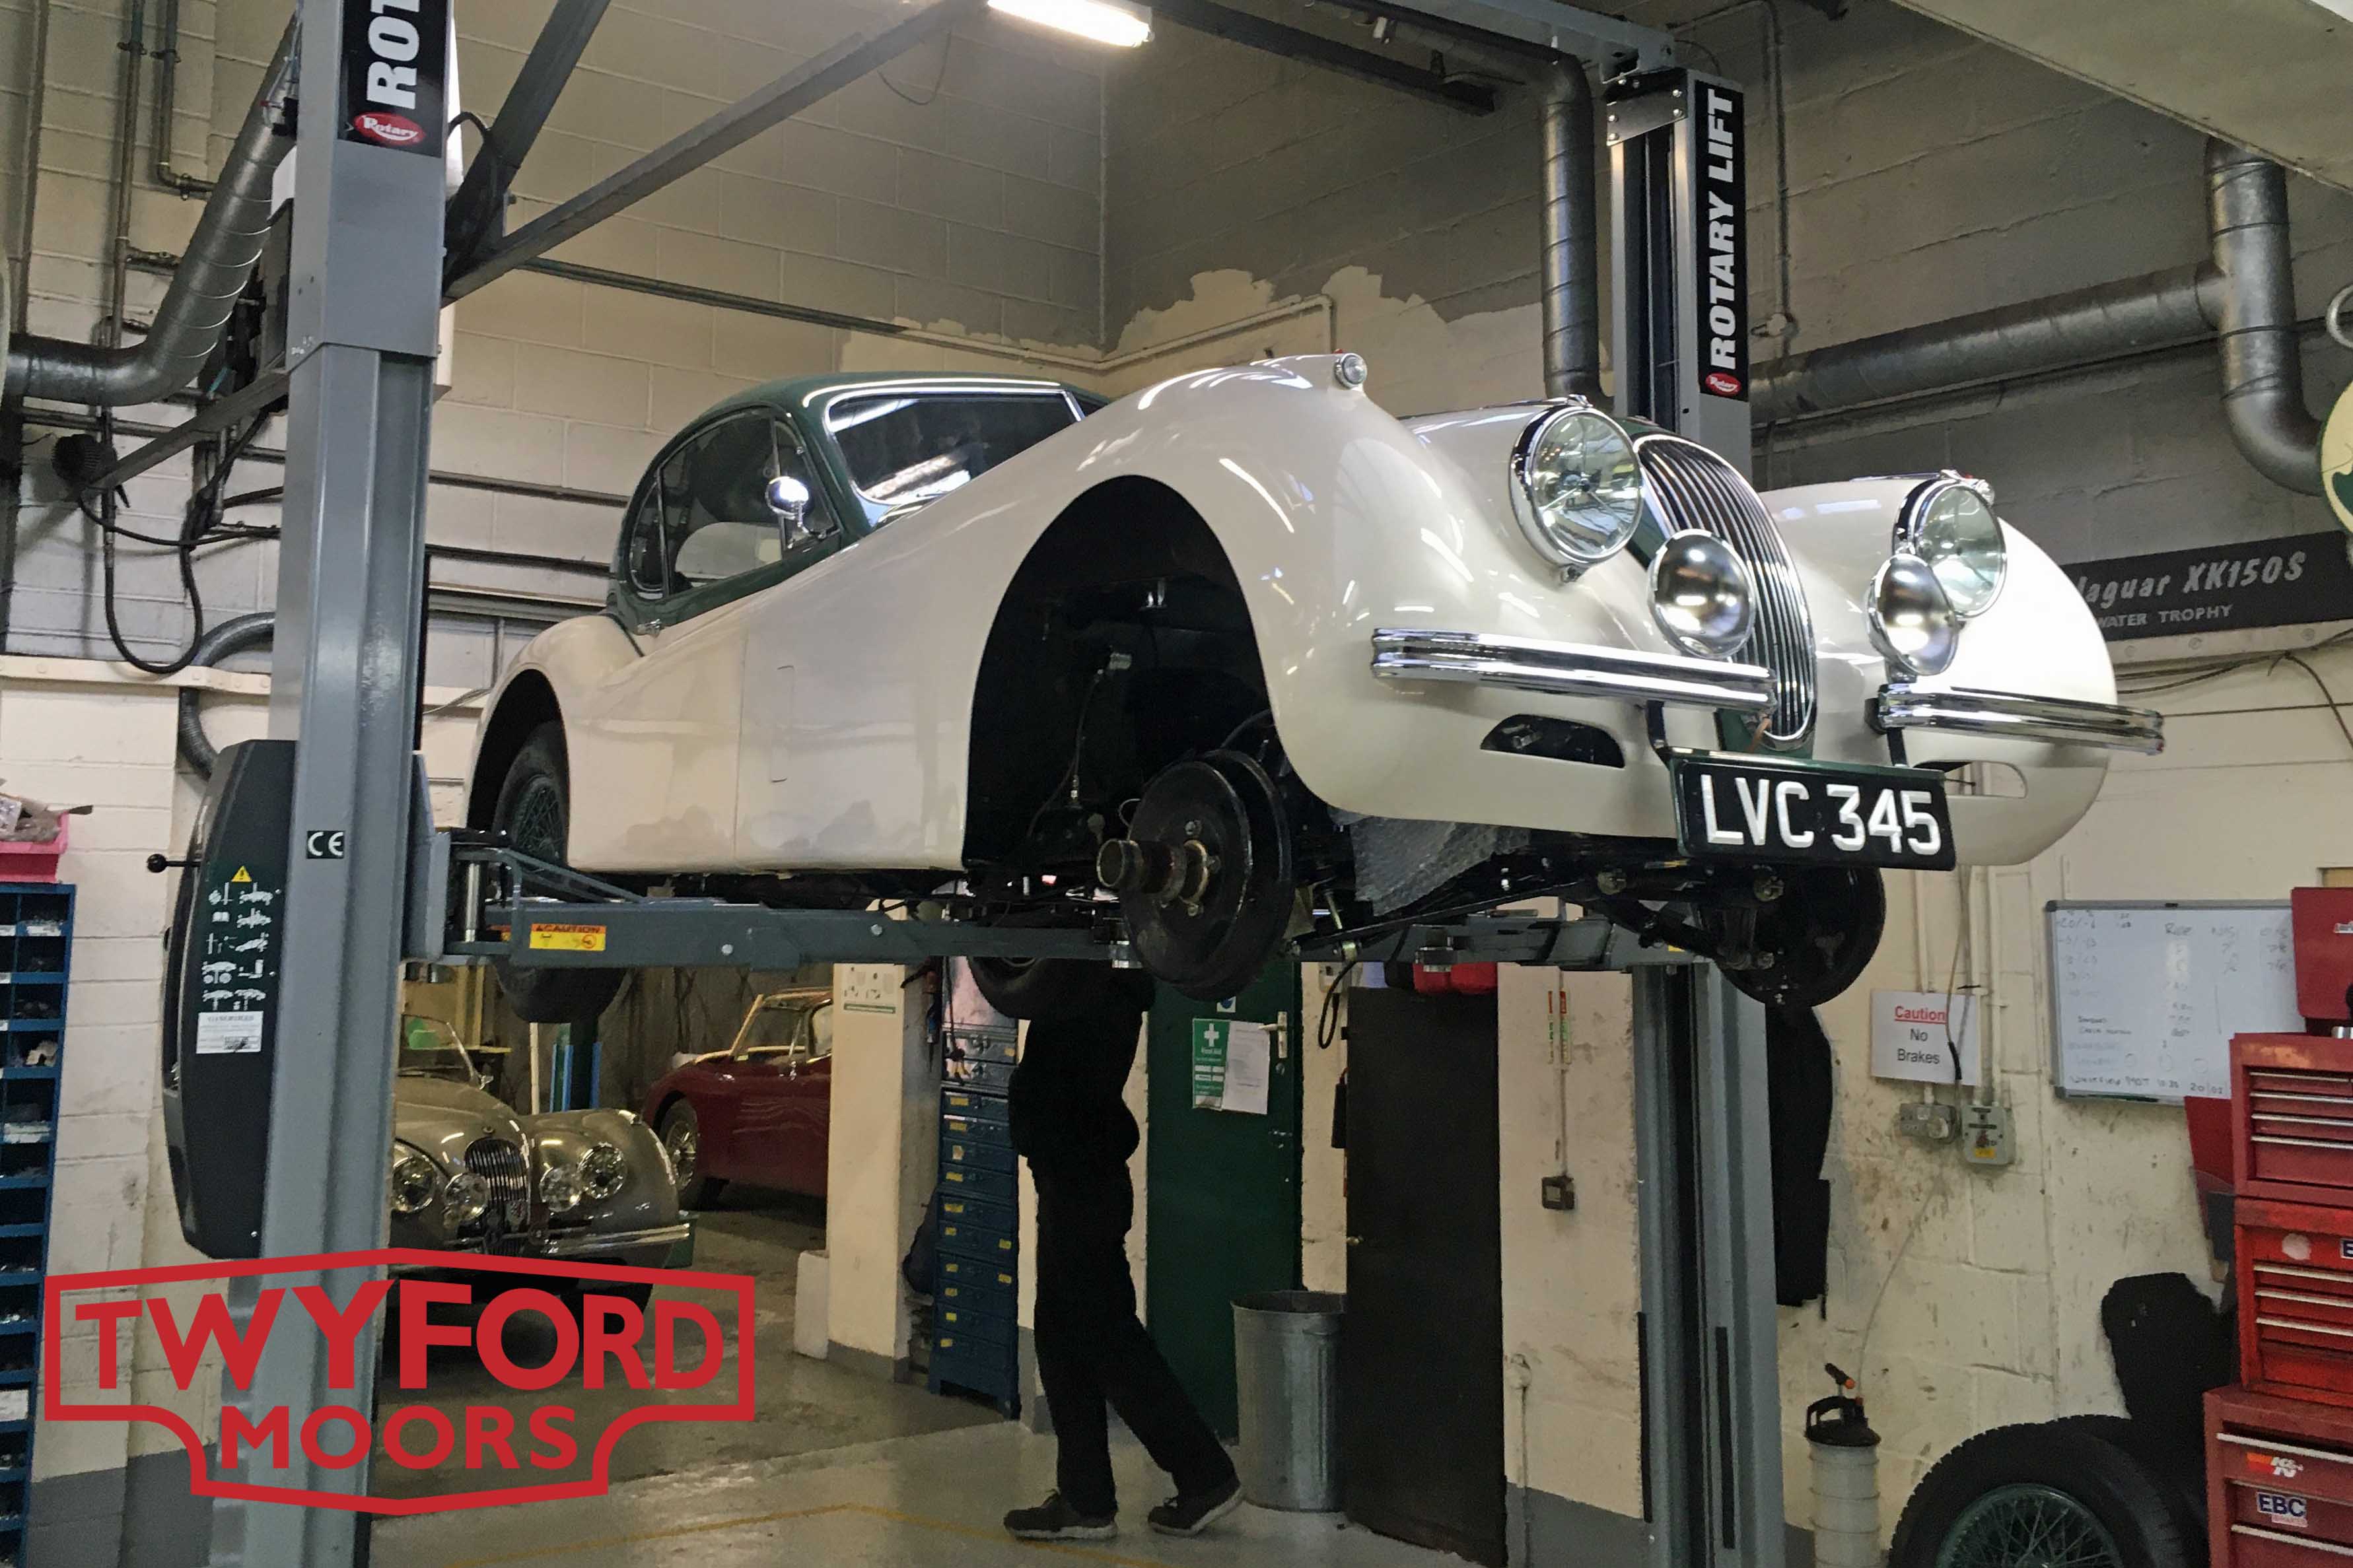 Jaguar XK120 LVC345 being refitted to original chassis